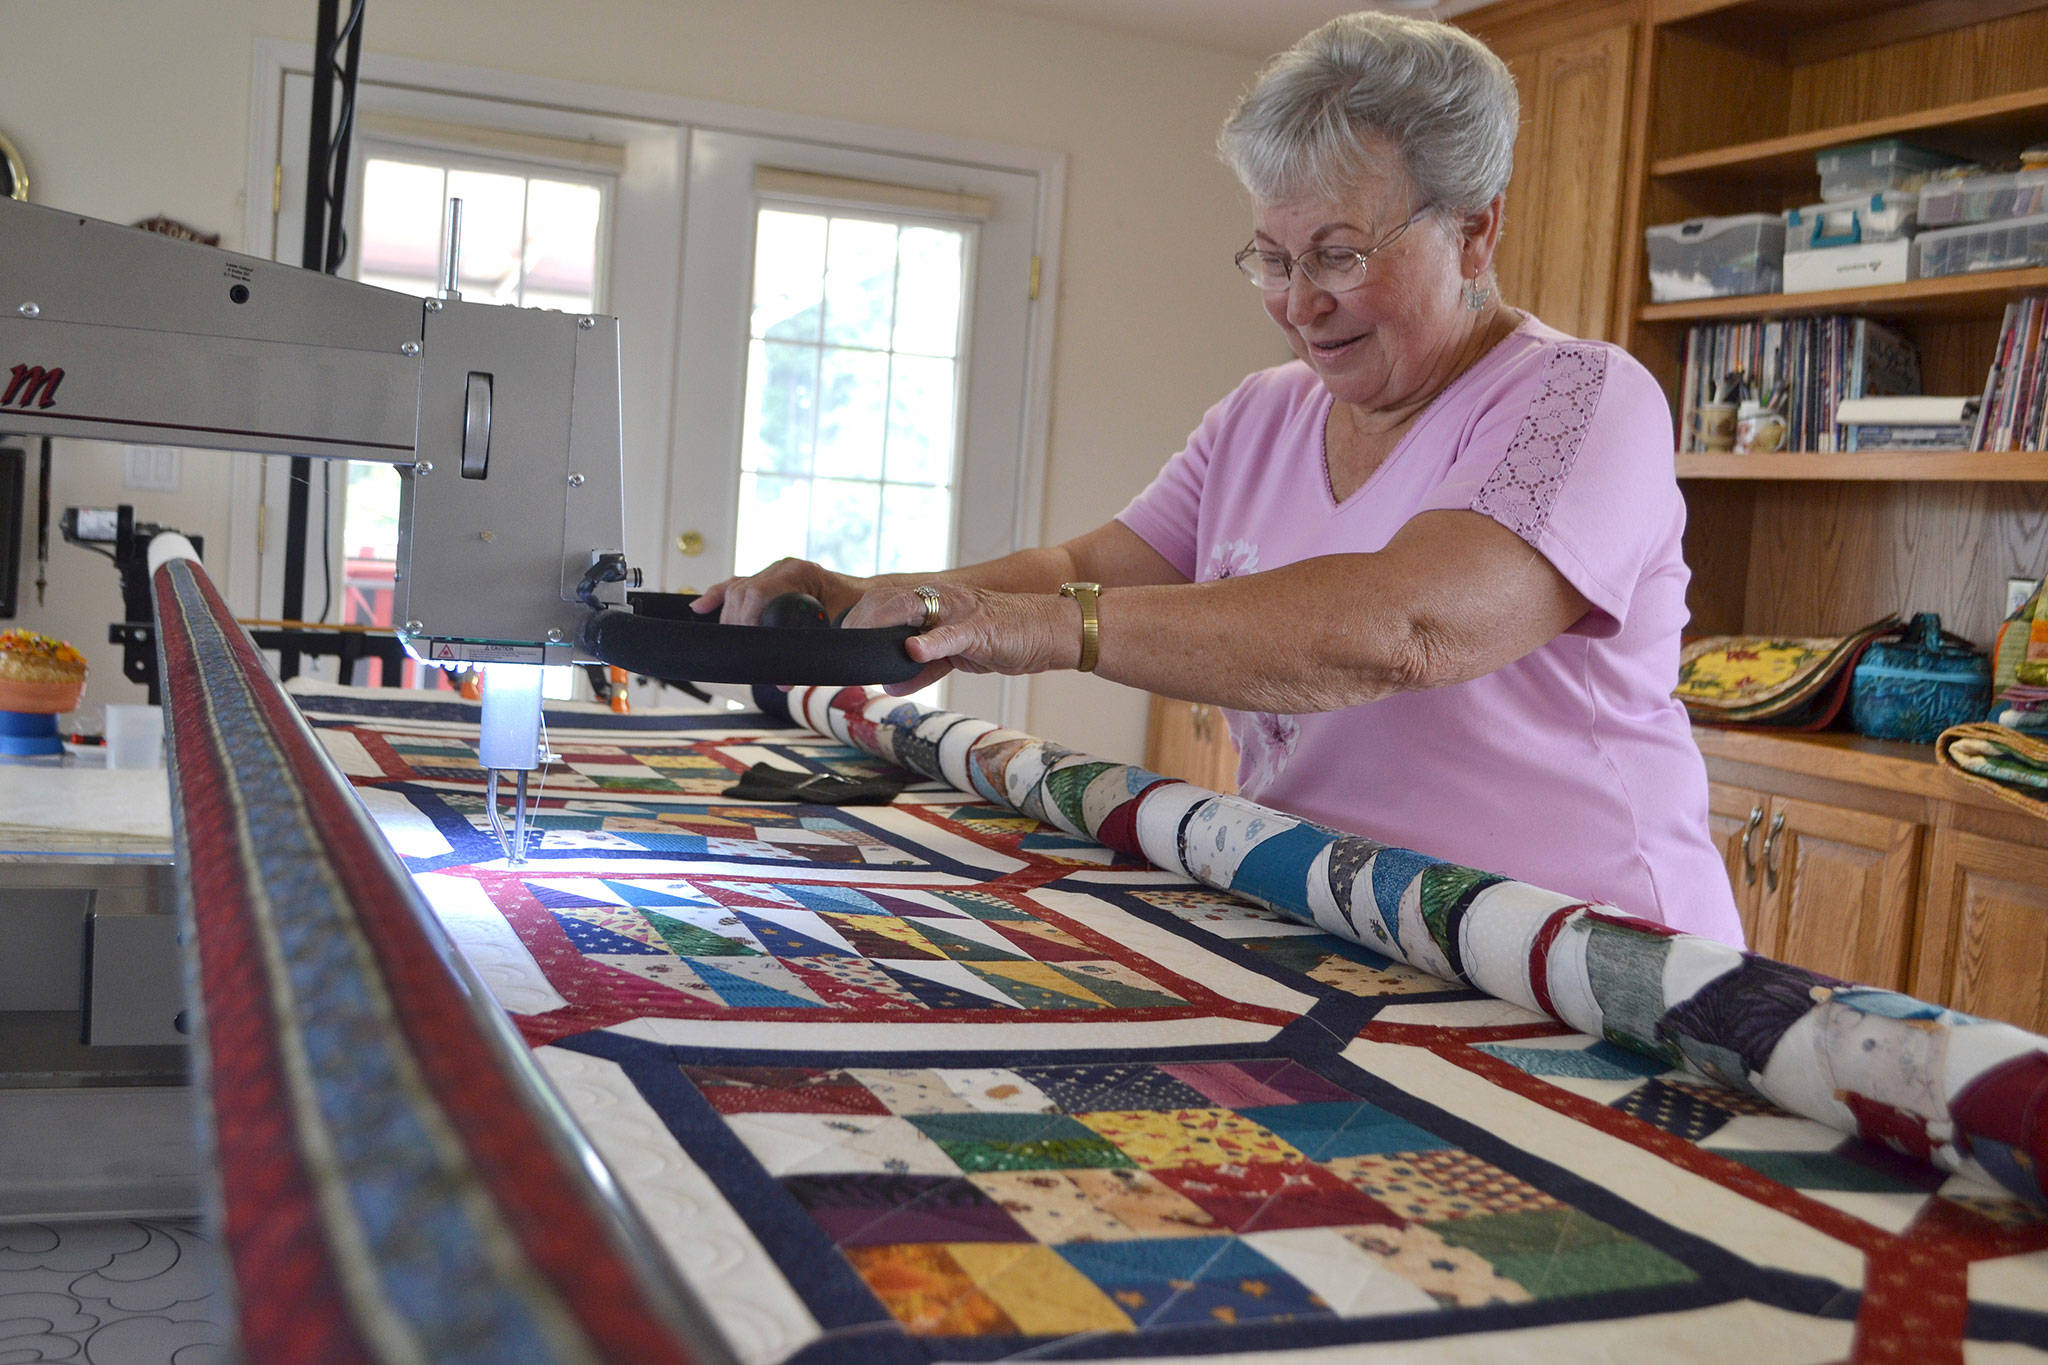 Glaucoma has made it difficult for Murph Gerber to continue longarm quilting, but she continues to work in the medium and with other quilts a few days a week, she says. (Matthew Nash/Olympic Peninsula News Group)